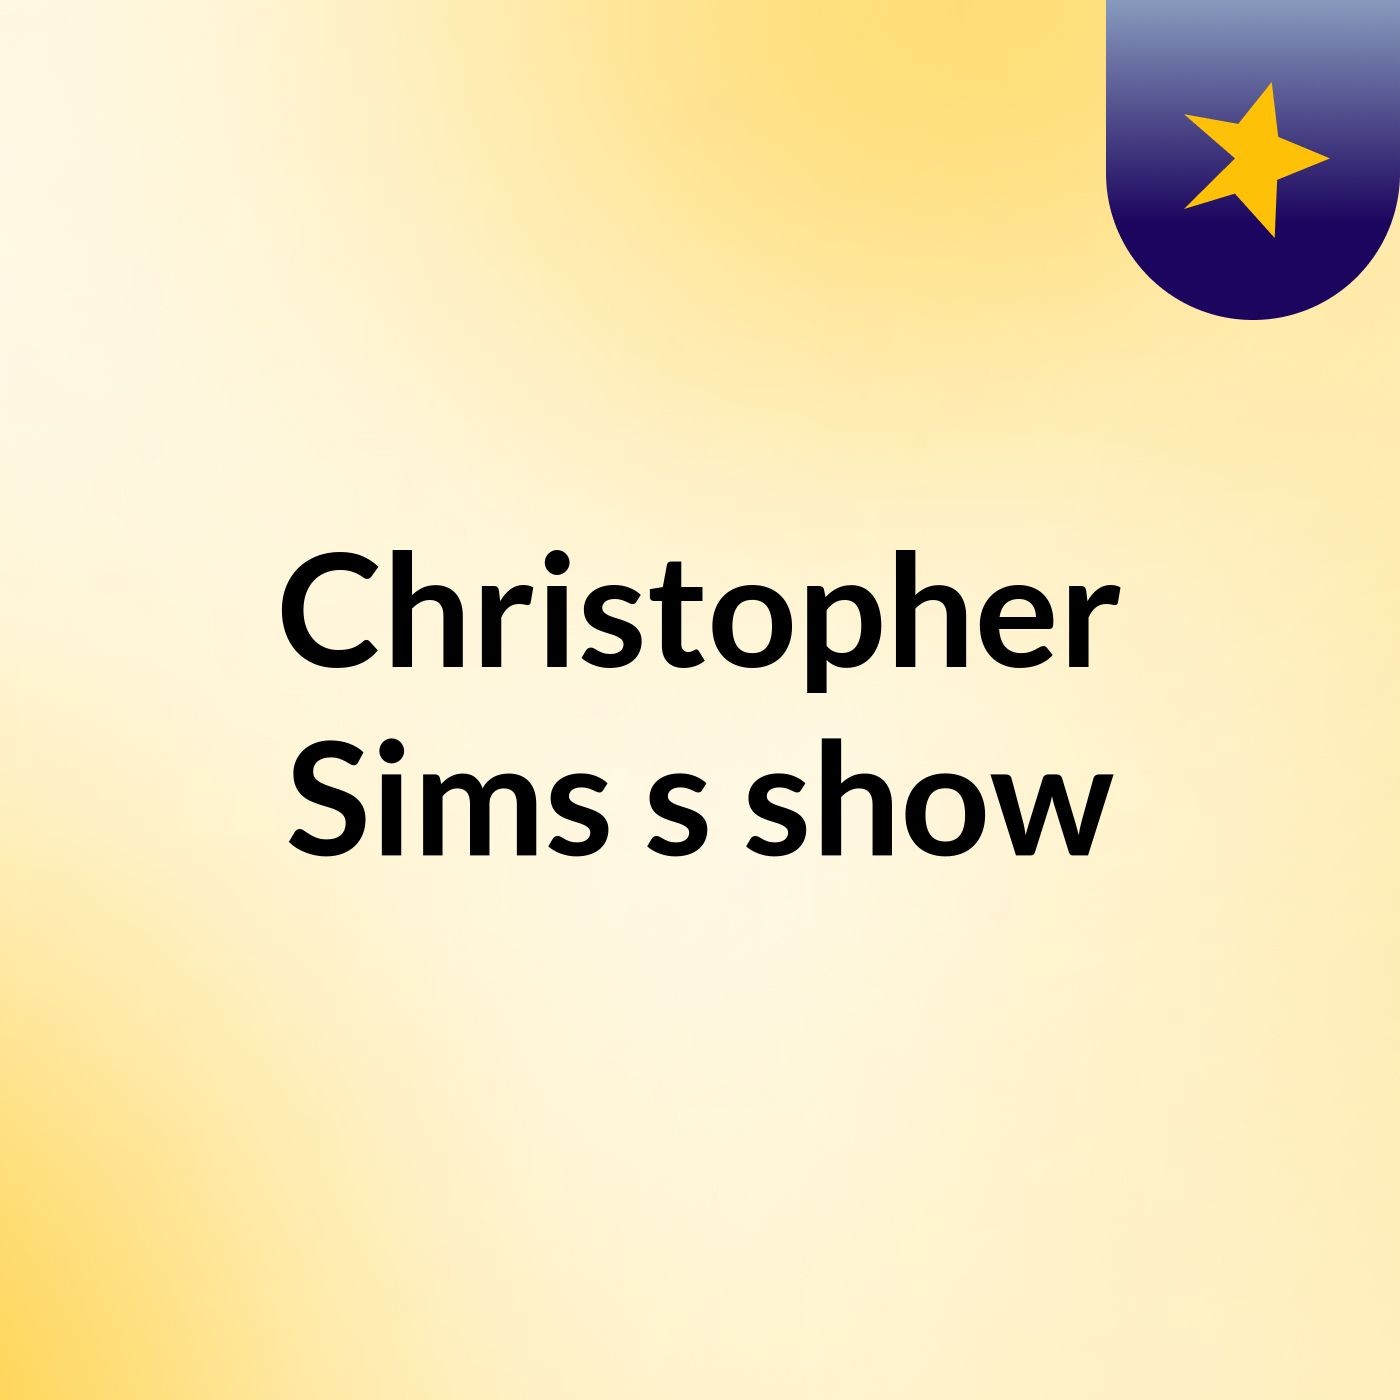 Christopher Sims's show